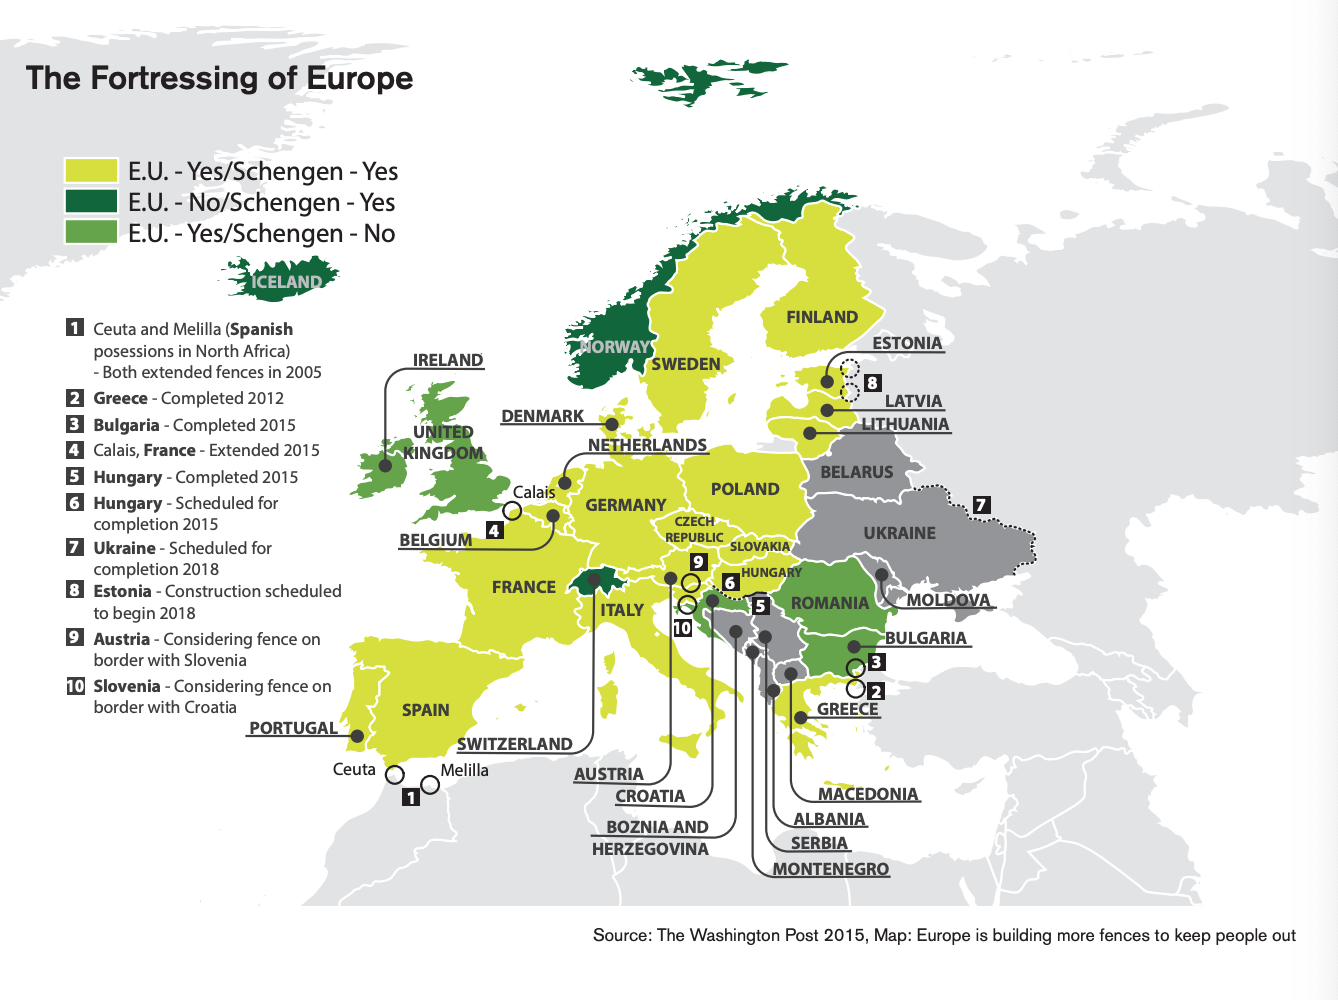 This infographic includes a map which showcases the fortressing of Europe. 